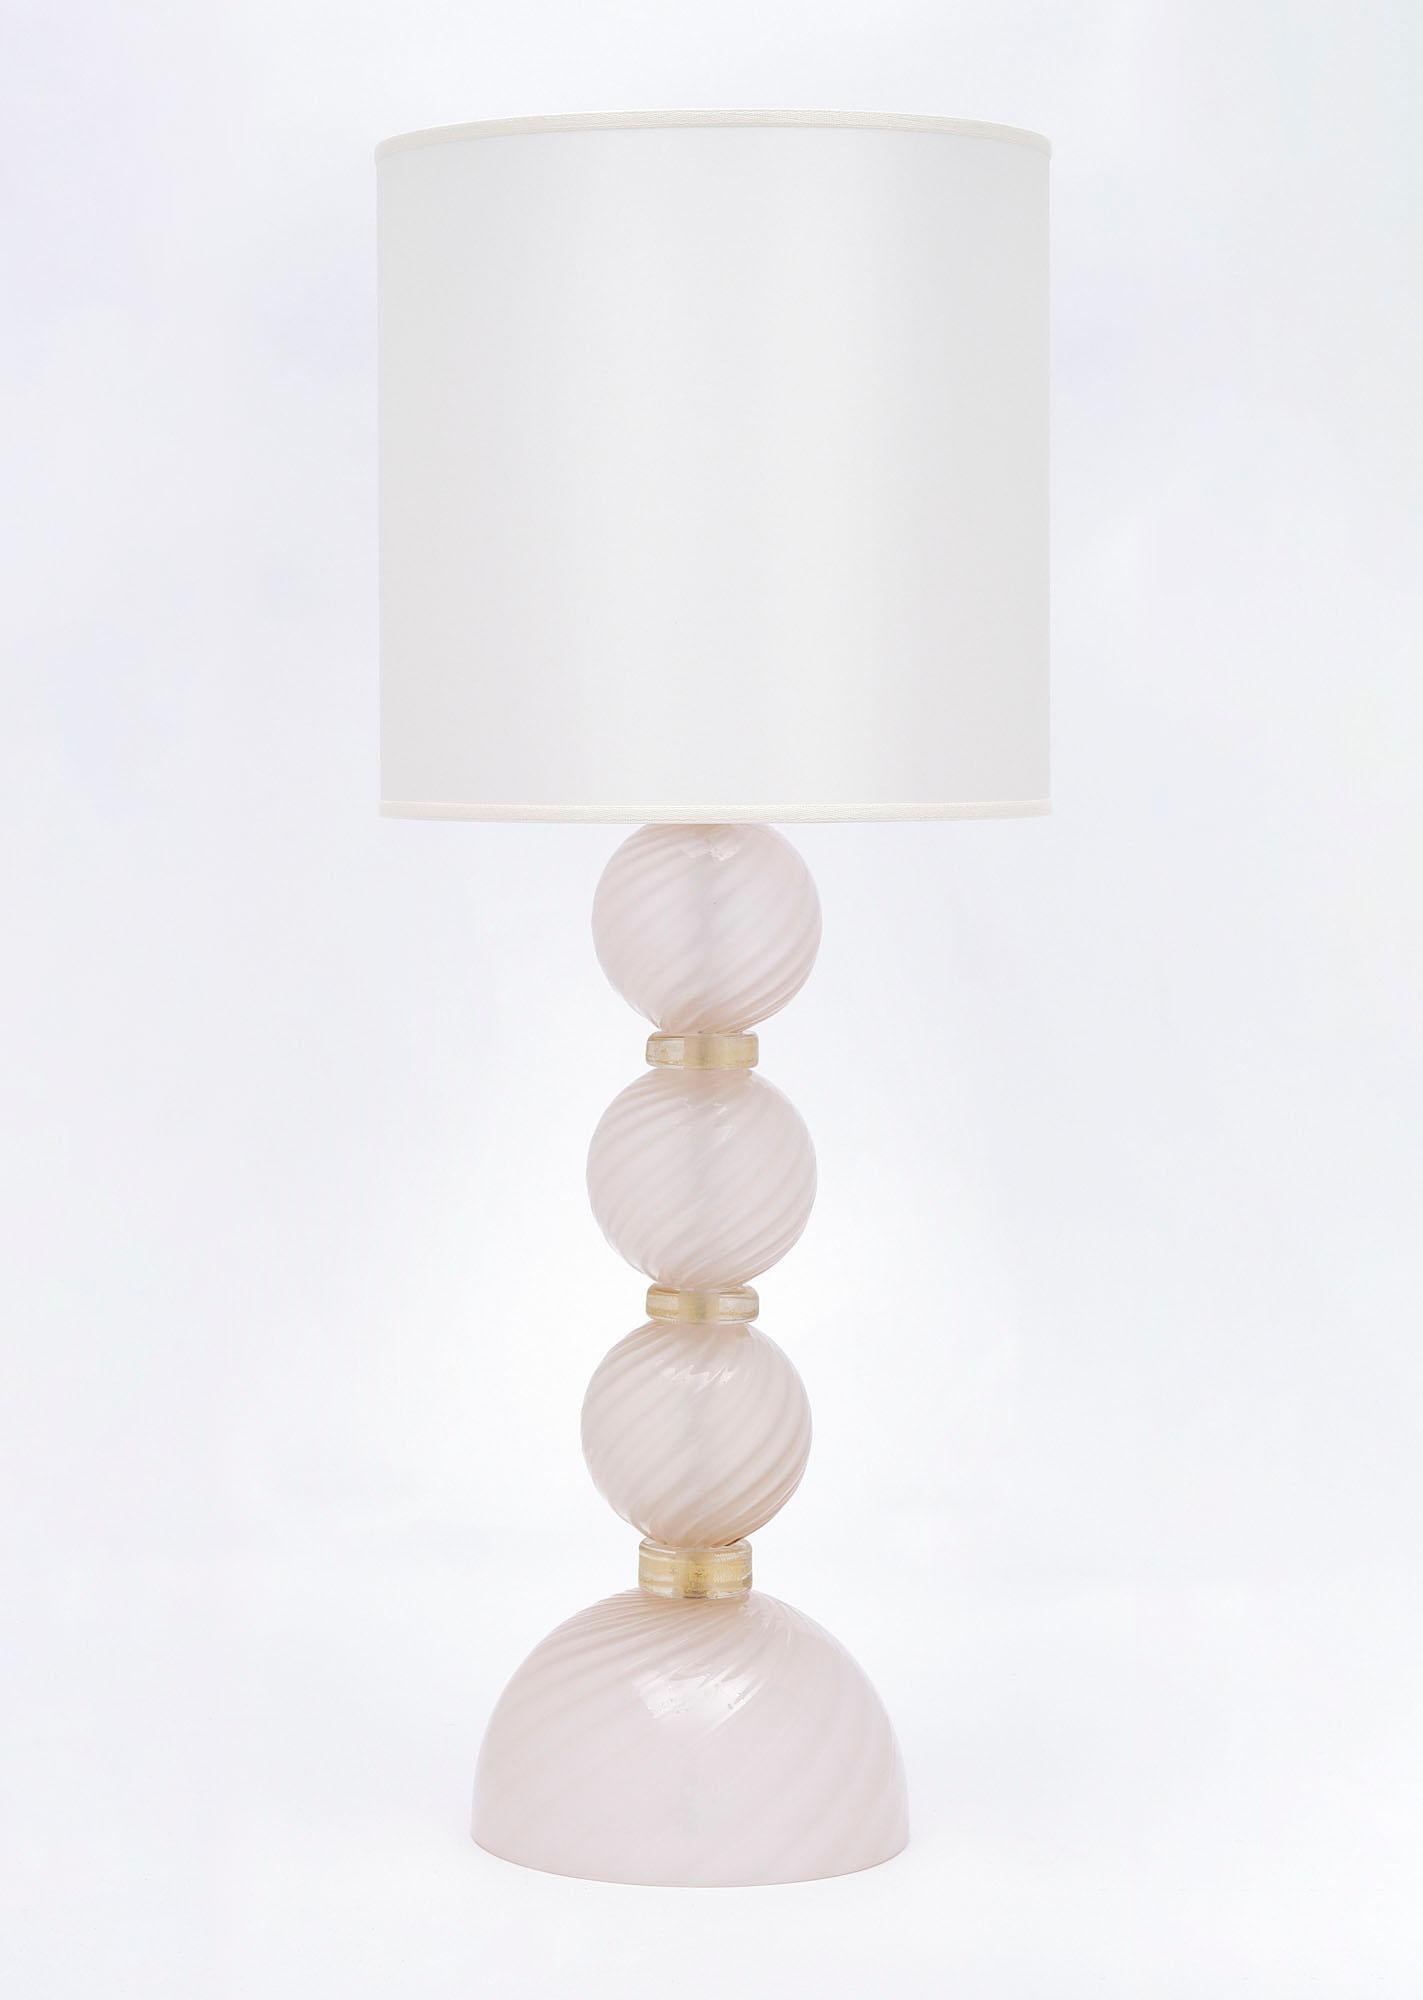 Pair of lamps of Murano glass from Italy. These lamps feature spheres of swirling hand-blown glass on a glass base in a beautiful light pink tone. Each sphere is separated with a 24 carat gold fused ring of glass. They have been newly wired to fit